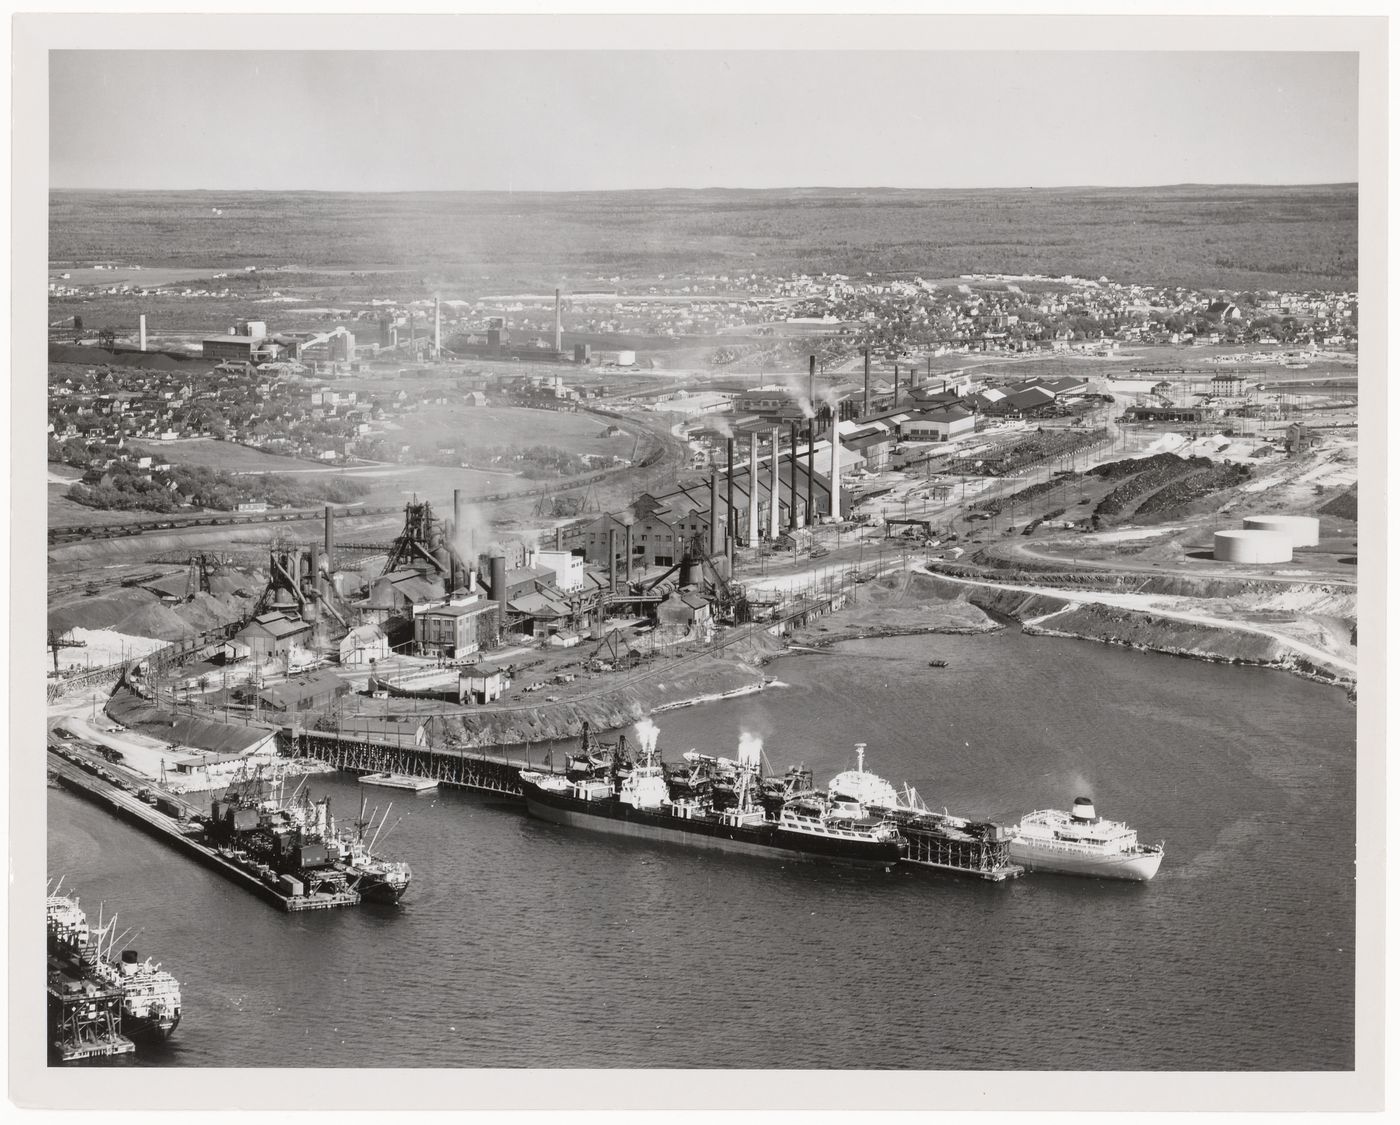 Sydney with Dosco Steel Mill and harbour, Nova Scotia